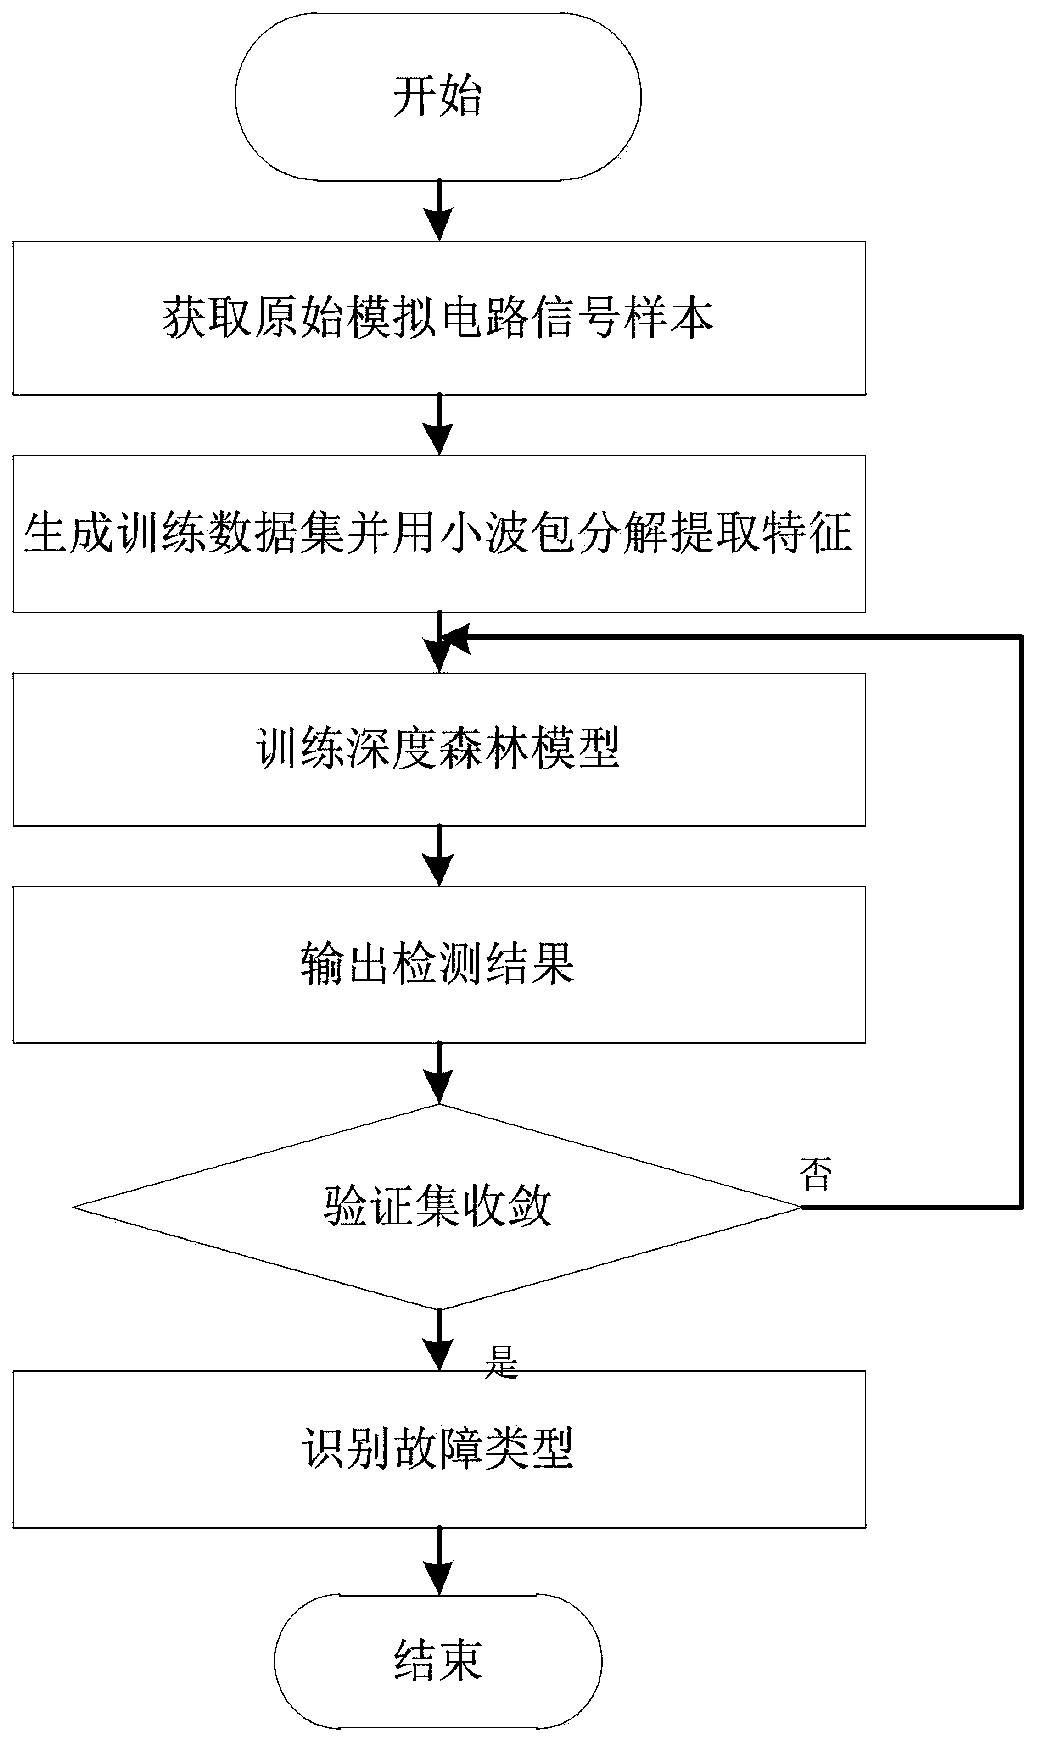 Analog circuit intermittent fault diagnosis method based on multi-granularity cascade forest